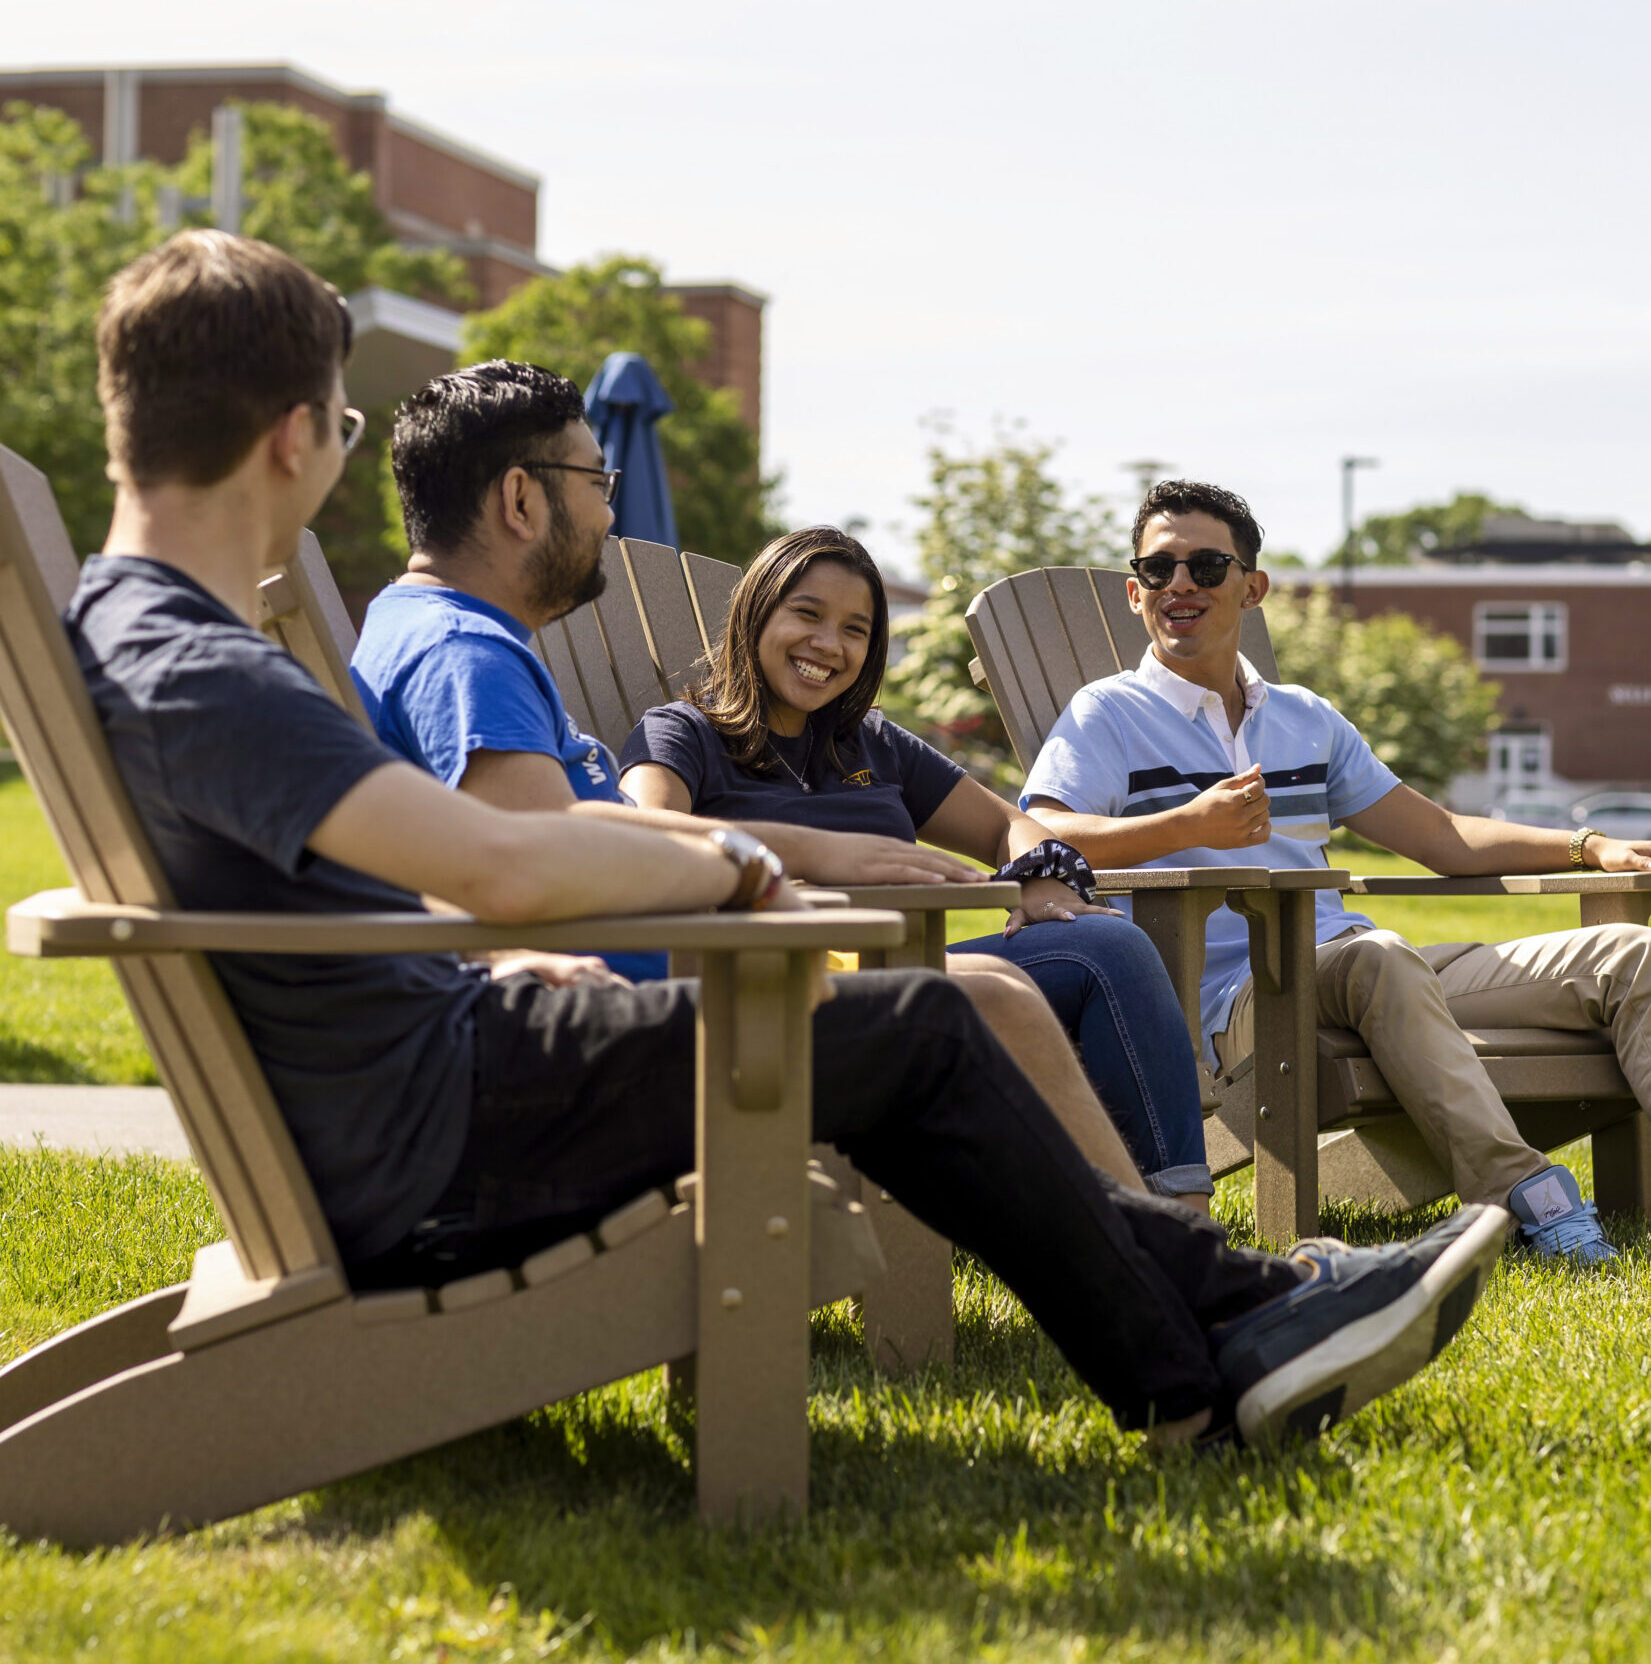 4 Worcester state students sitting in Adirondack chairs outside on campus